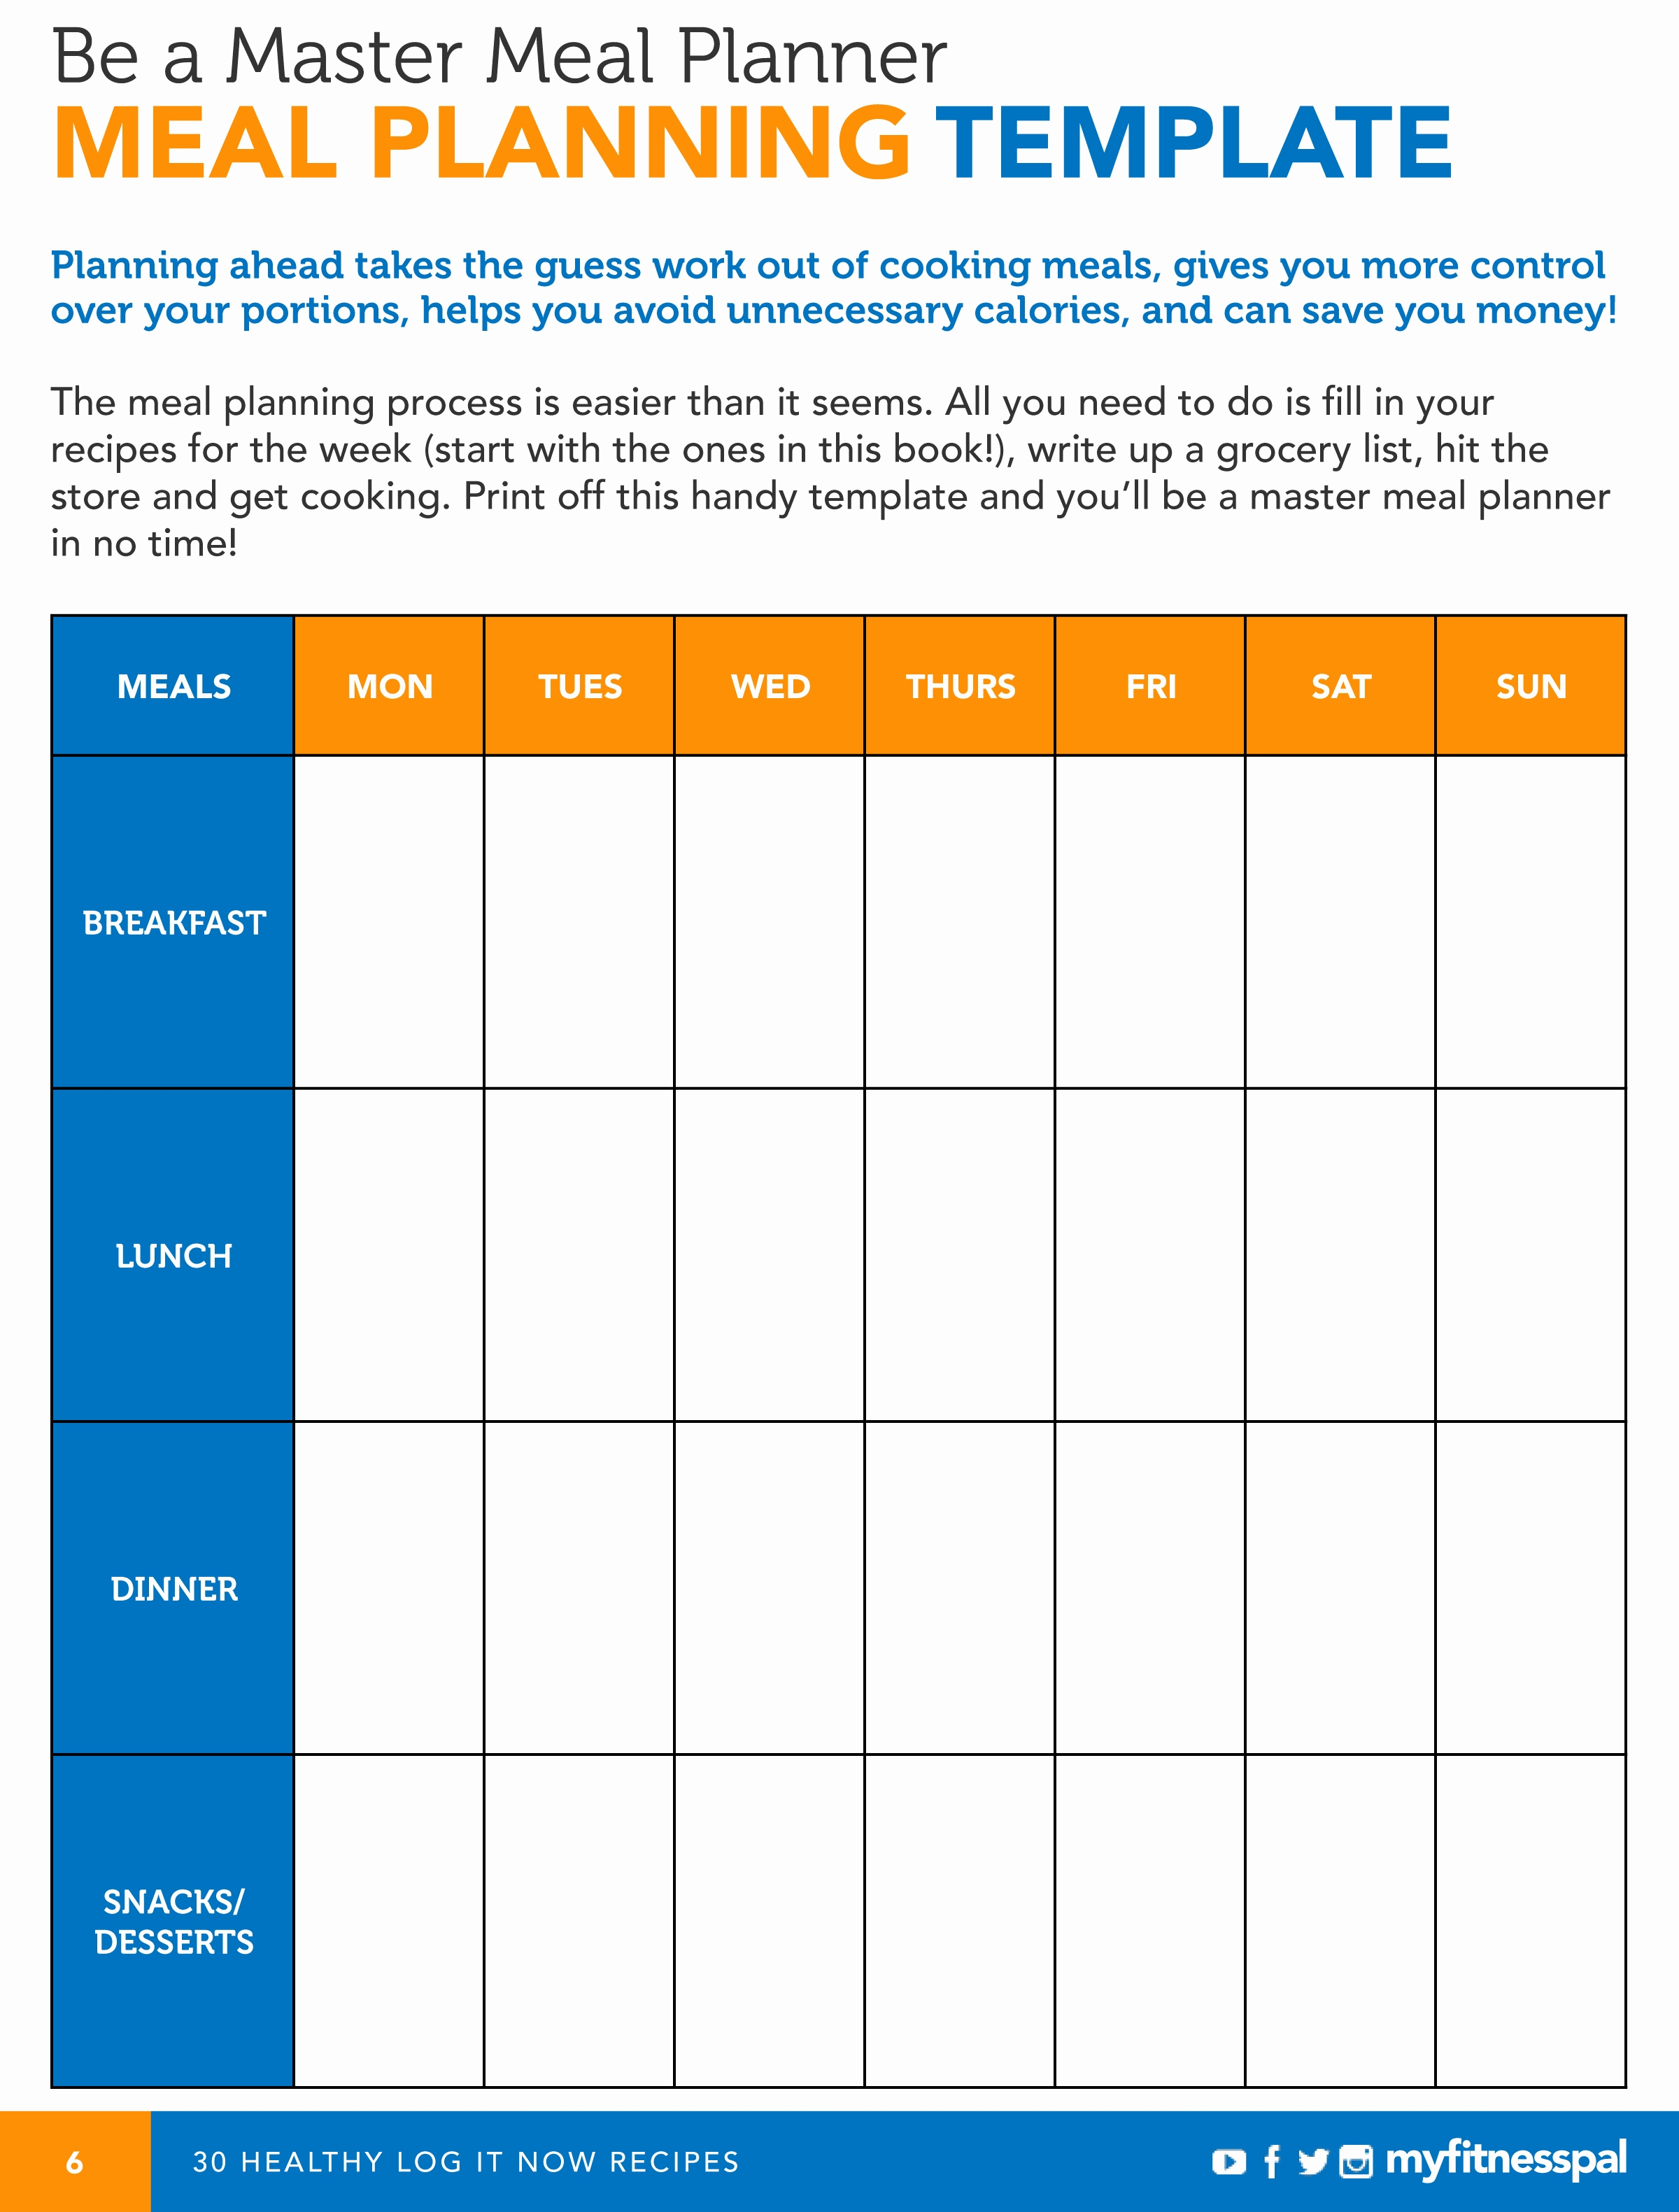 Weekly Meal Plan Template Free Fresh Be A Master Meal Planner with This Template